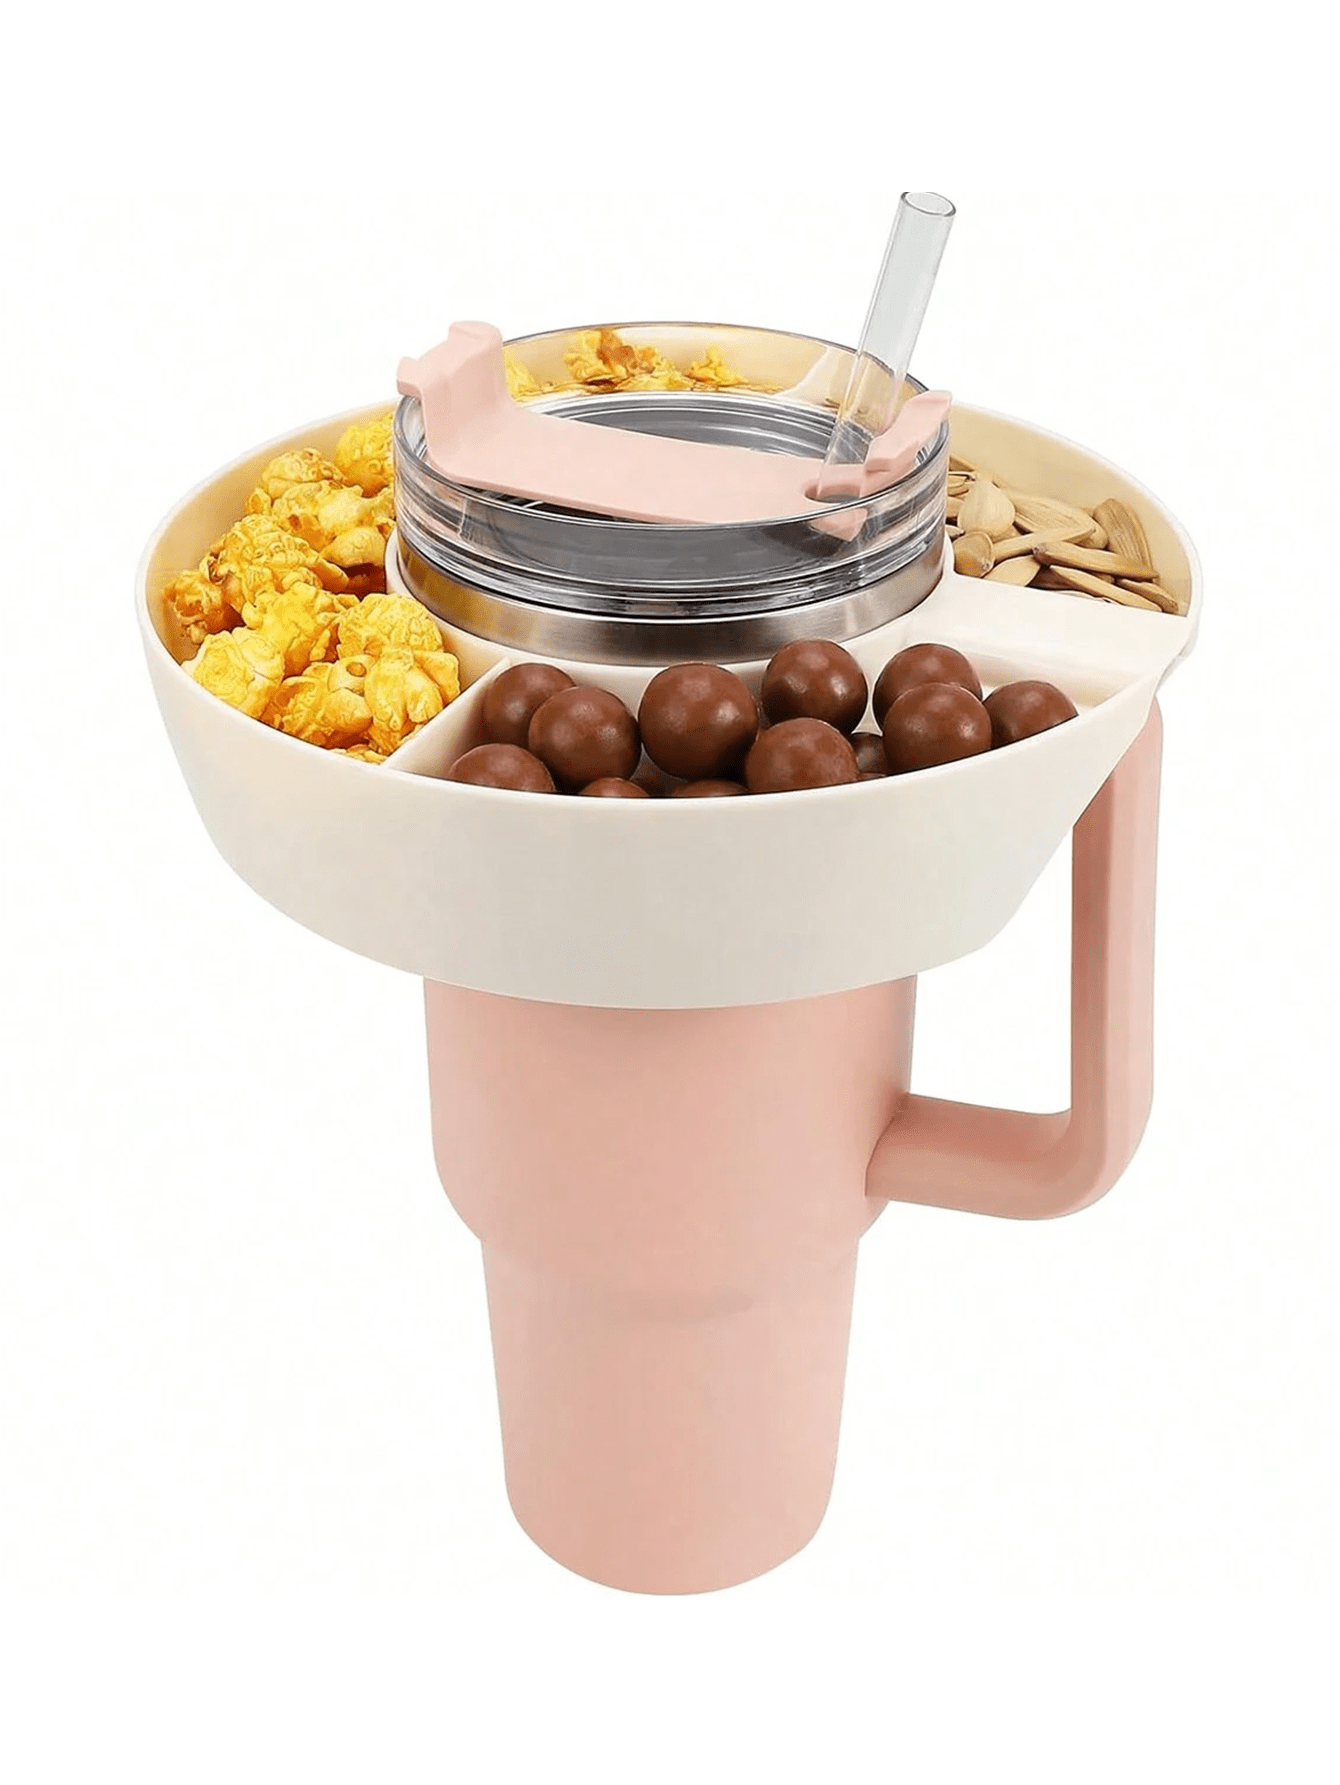 1pc Cup Holder Snack Tray, Easy To Assemble, Suitable For Reusable Snack Containers In The Accessories, With 3 Compartments, Compatible With Flat Cup Holders